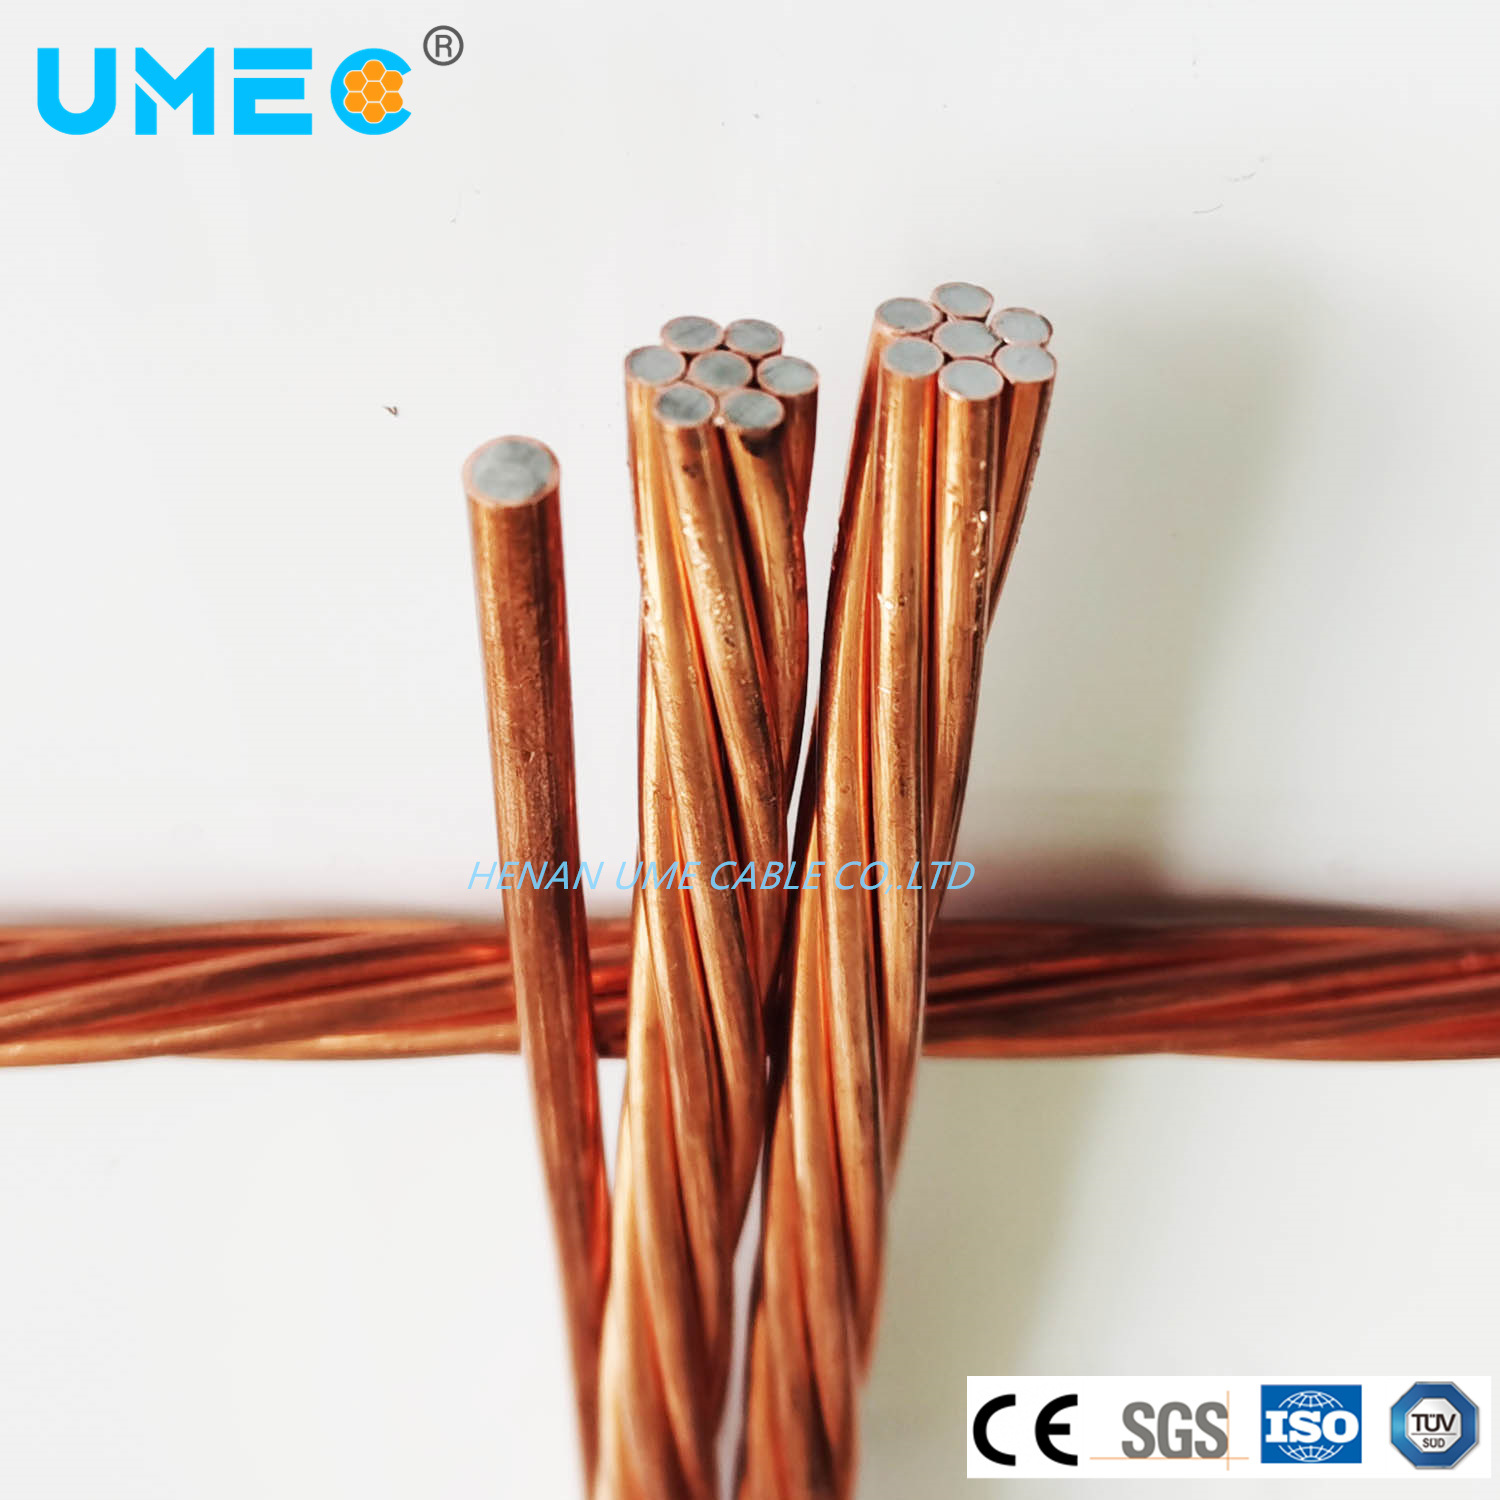 Copper Clad Steel Strand Wire CCS Copperweld Wire for Electrical Cables